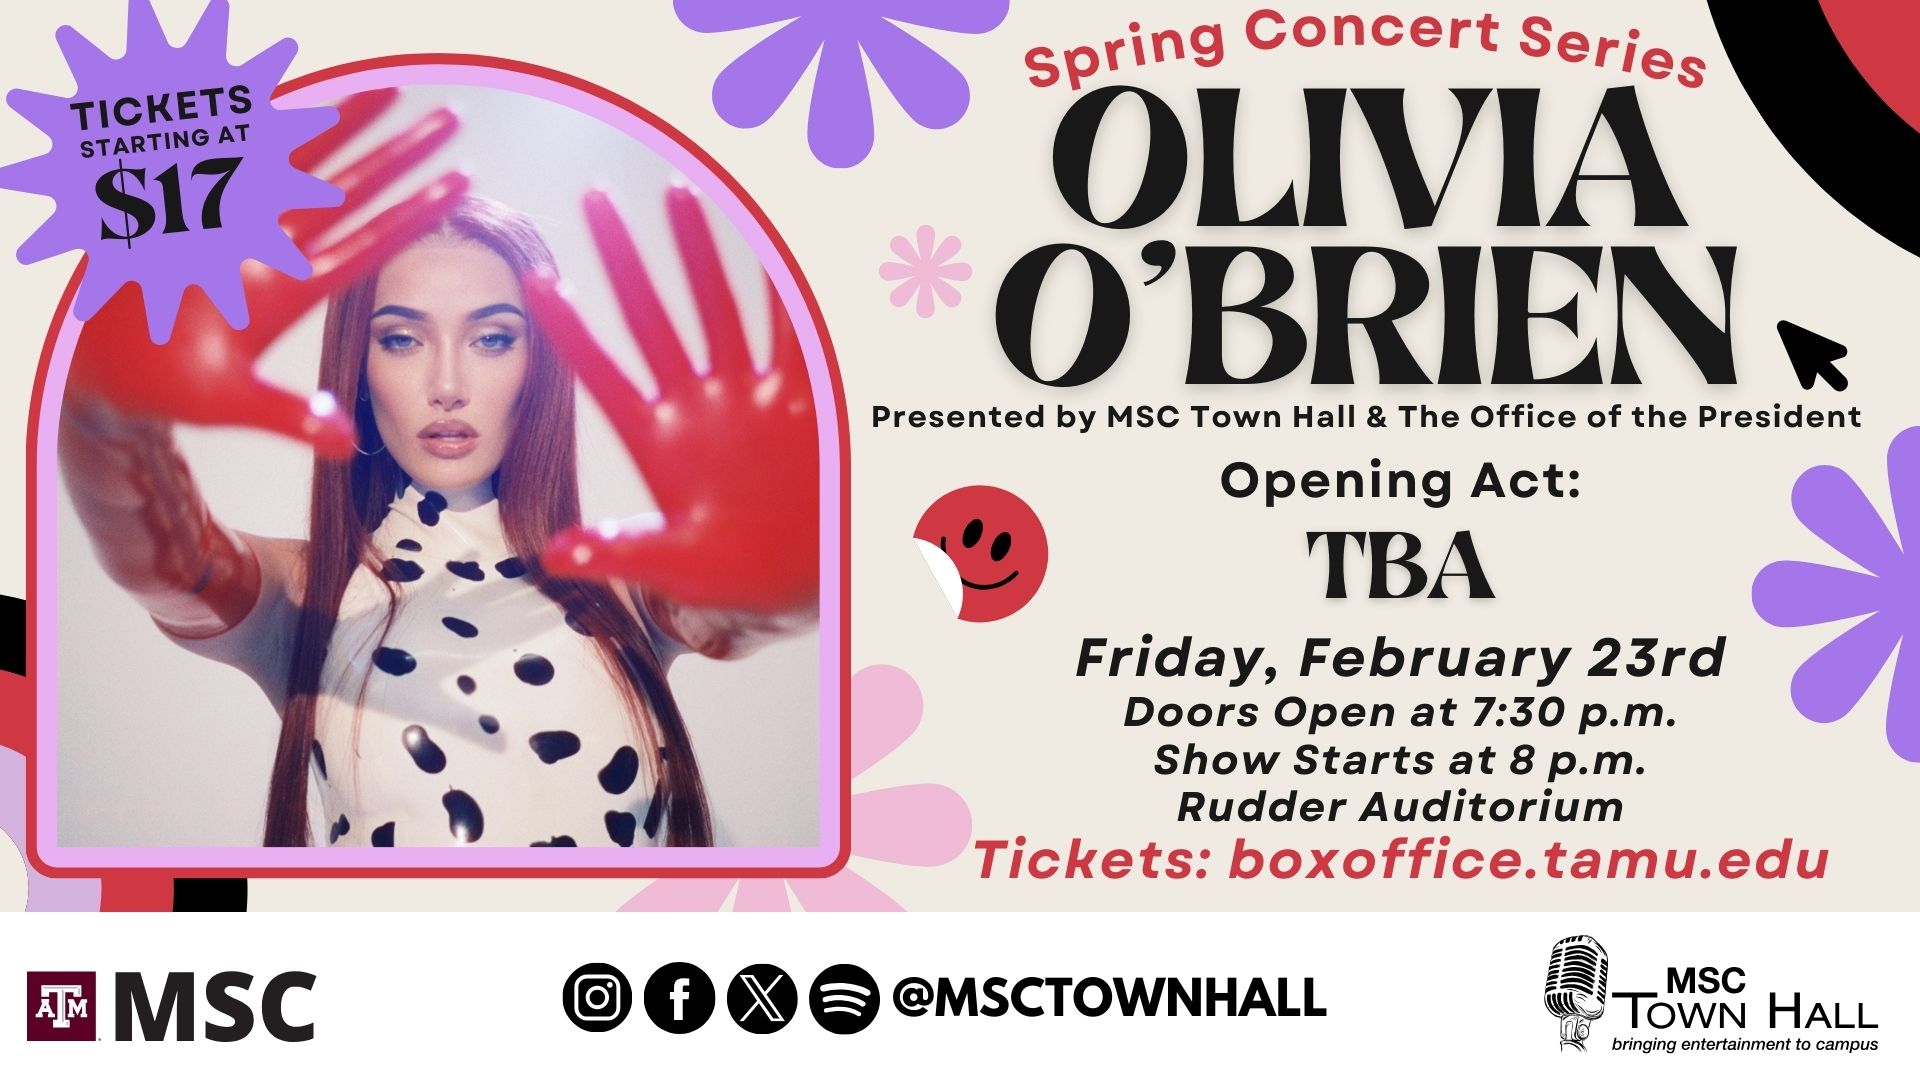 Spring Concert Series Olivia O'Brien, presented by MSC Town Hall and The Office of the President. Opening Act: TBA. Friday, February 23rd, Doors open at 7:30 p.m., Show starts at 8p.m., Rudder Auditorium, Tickets starting at $17 at boxoffice.tamu.edu Instagram , Facebook, X, Spotify @msctownhall